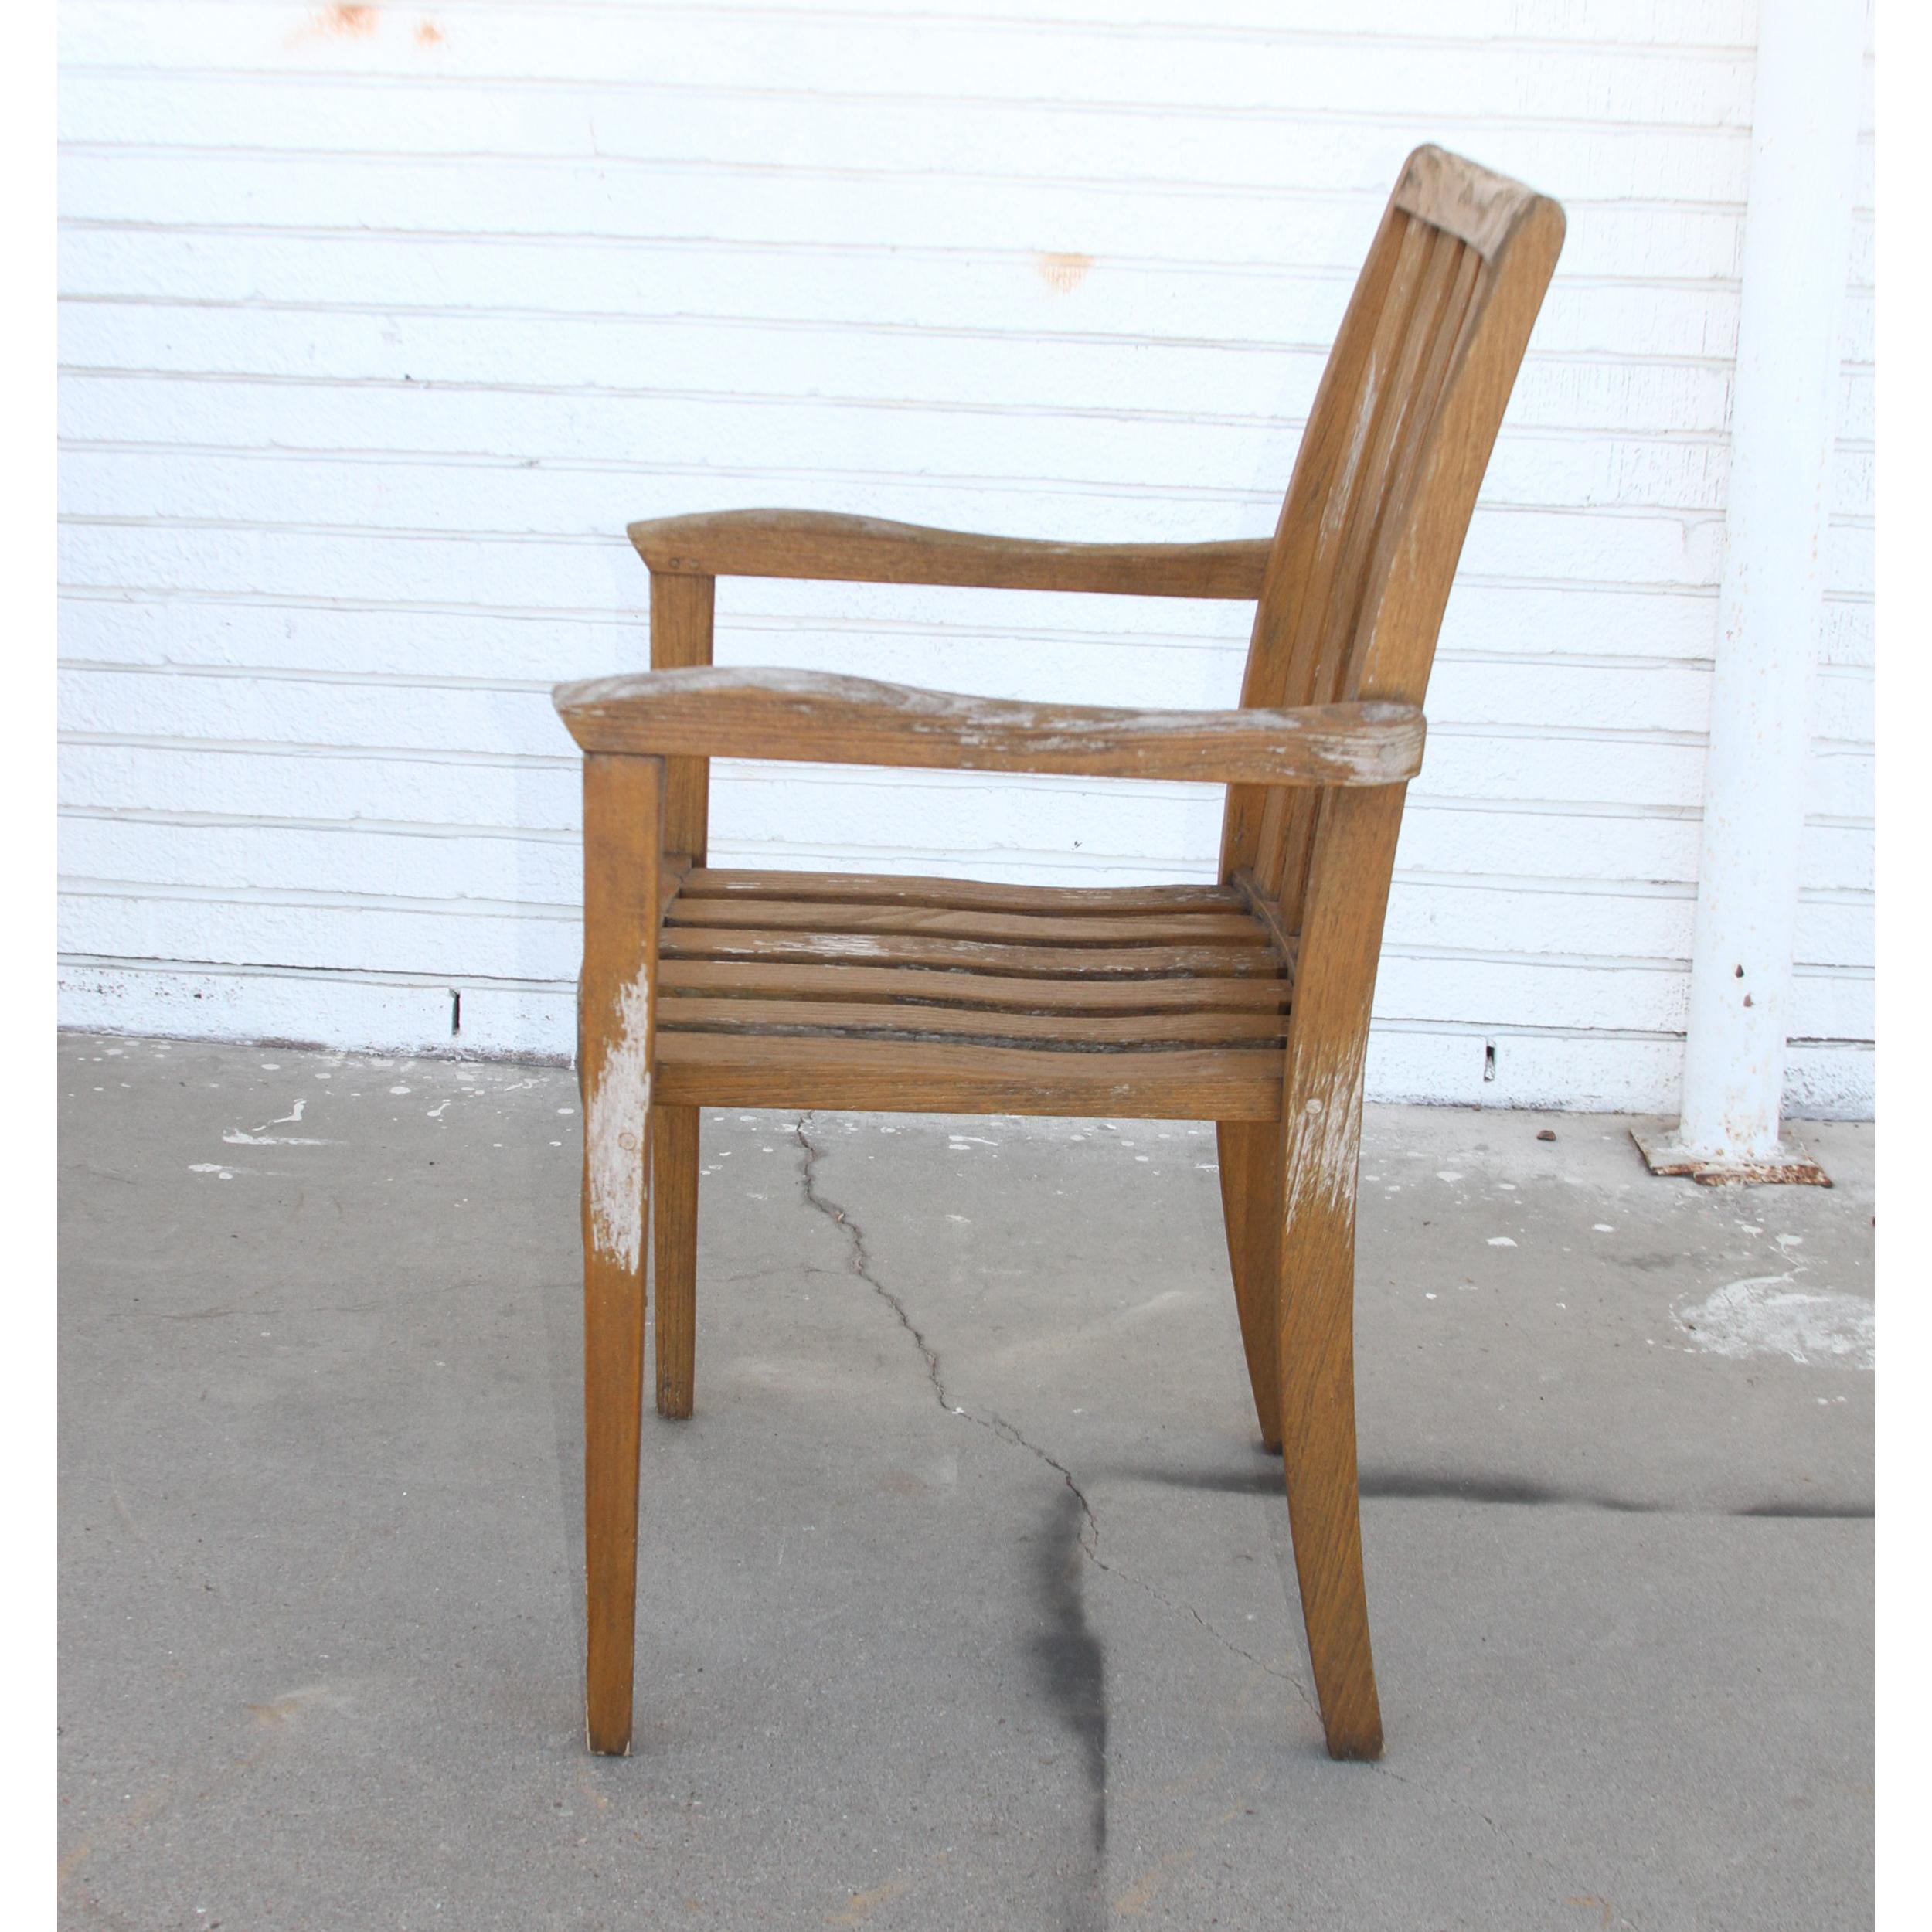 Wood Teak Maritime Heritage Chairs For Sale